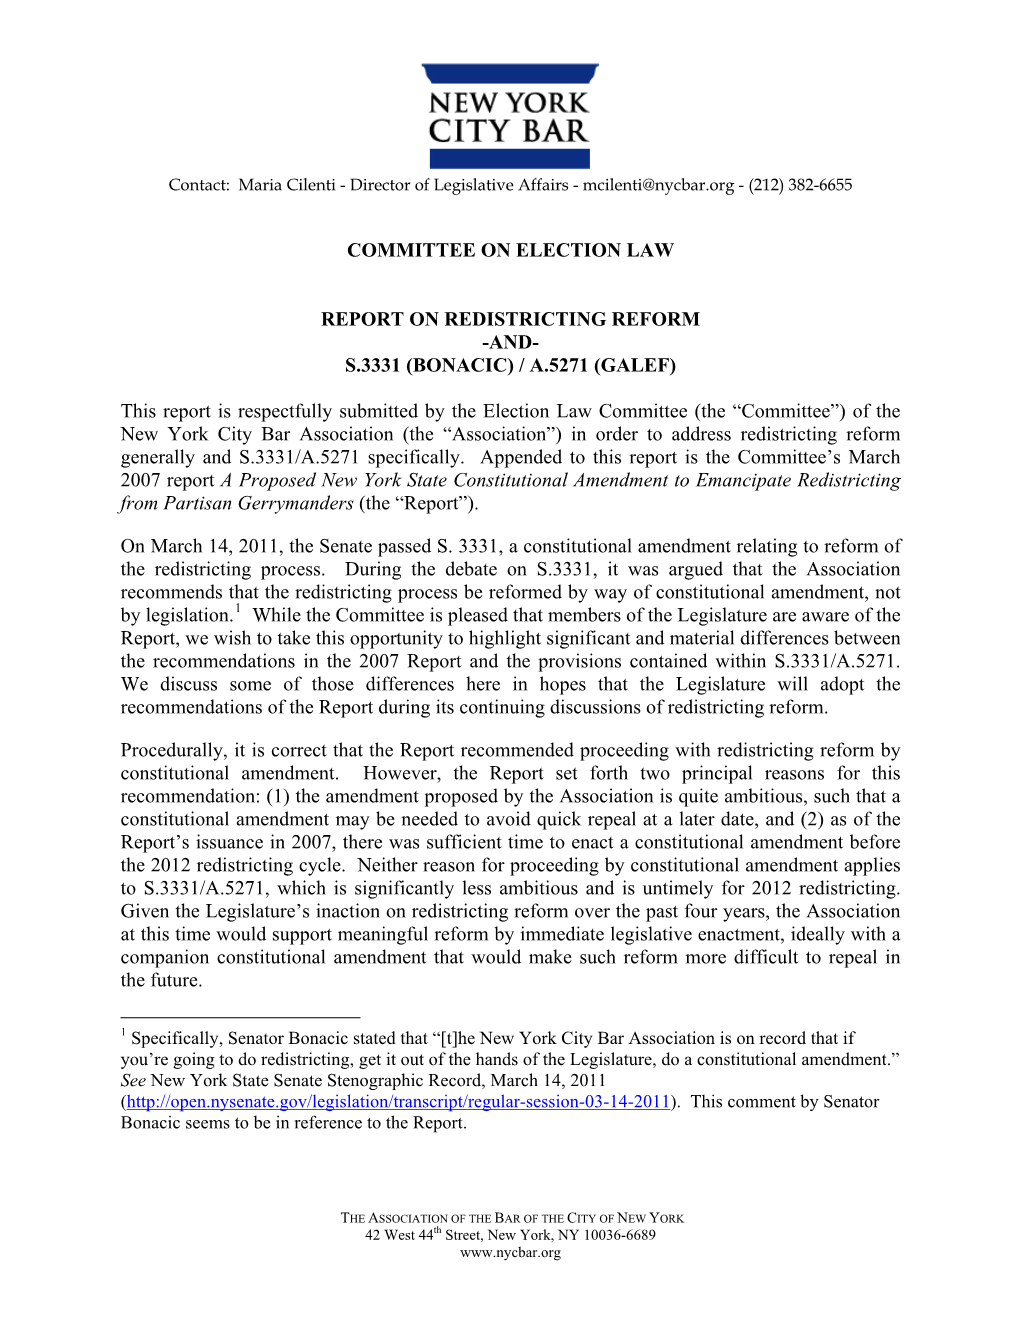 Committee on Election Law Report on Redistricting